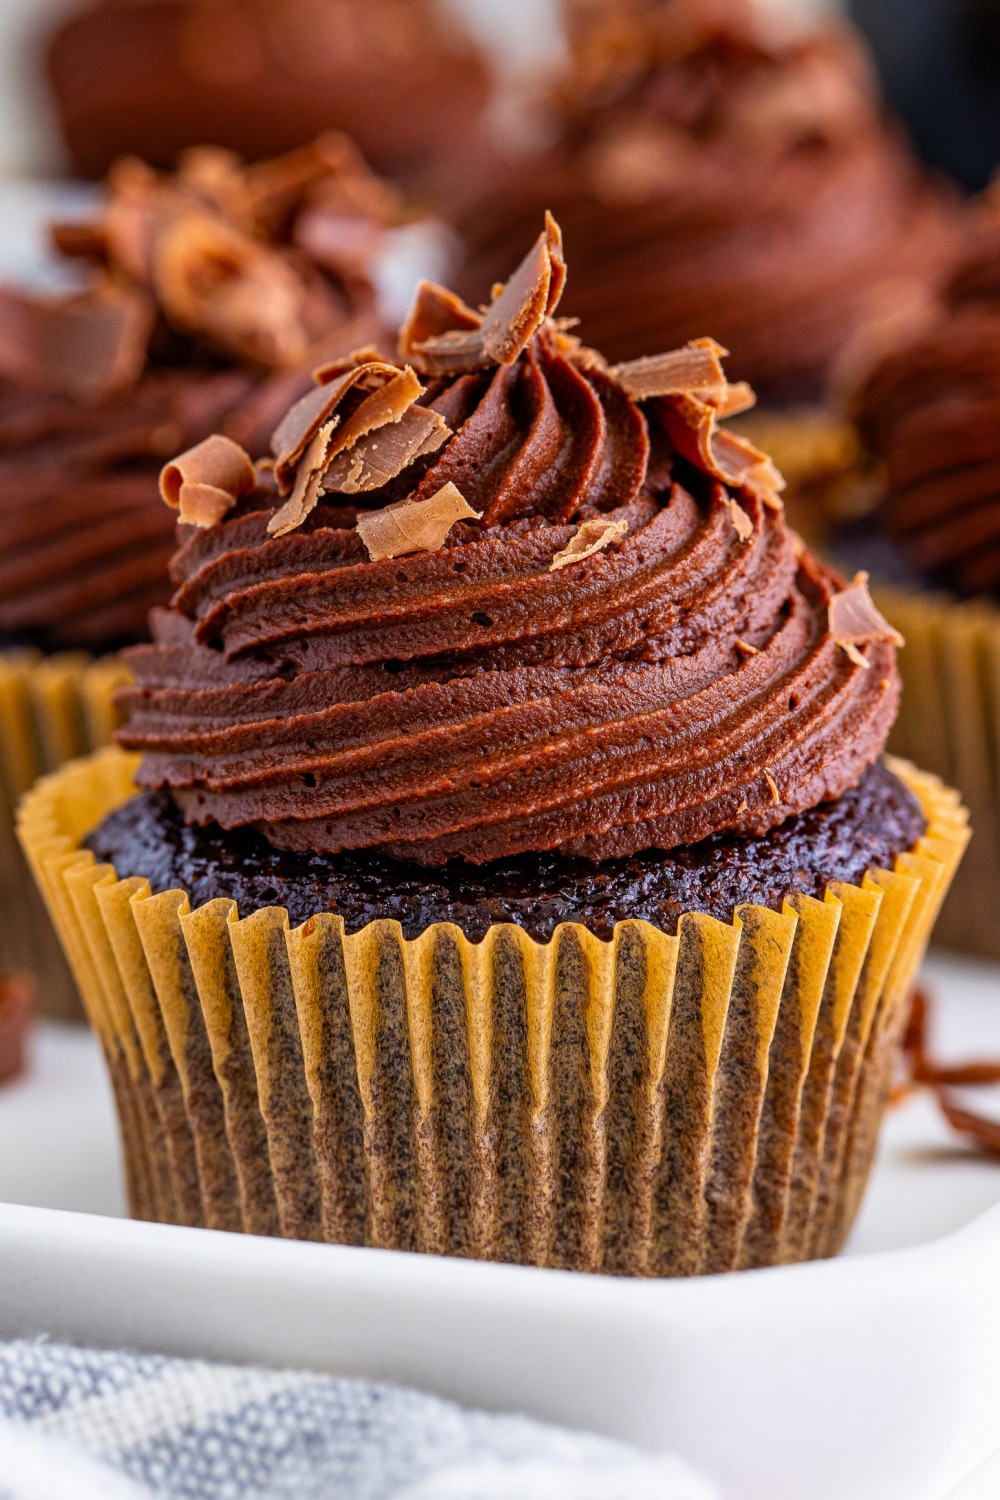 A Chocolate Bailey's Cupcake in paper wrapper sitting on a white countertop.